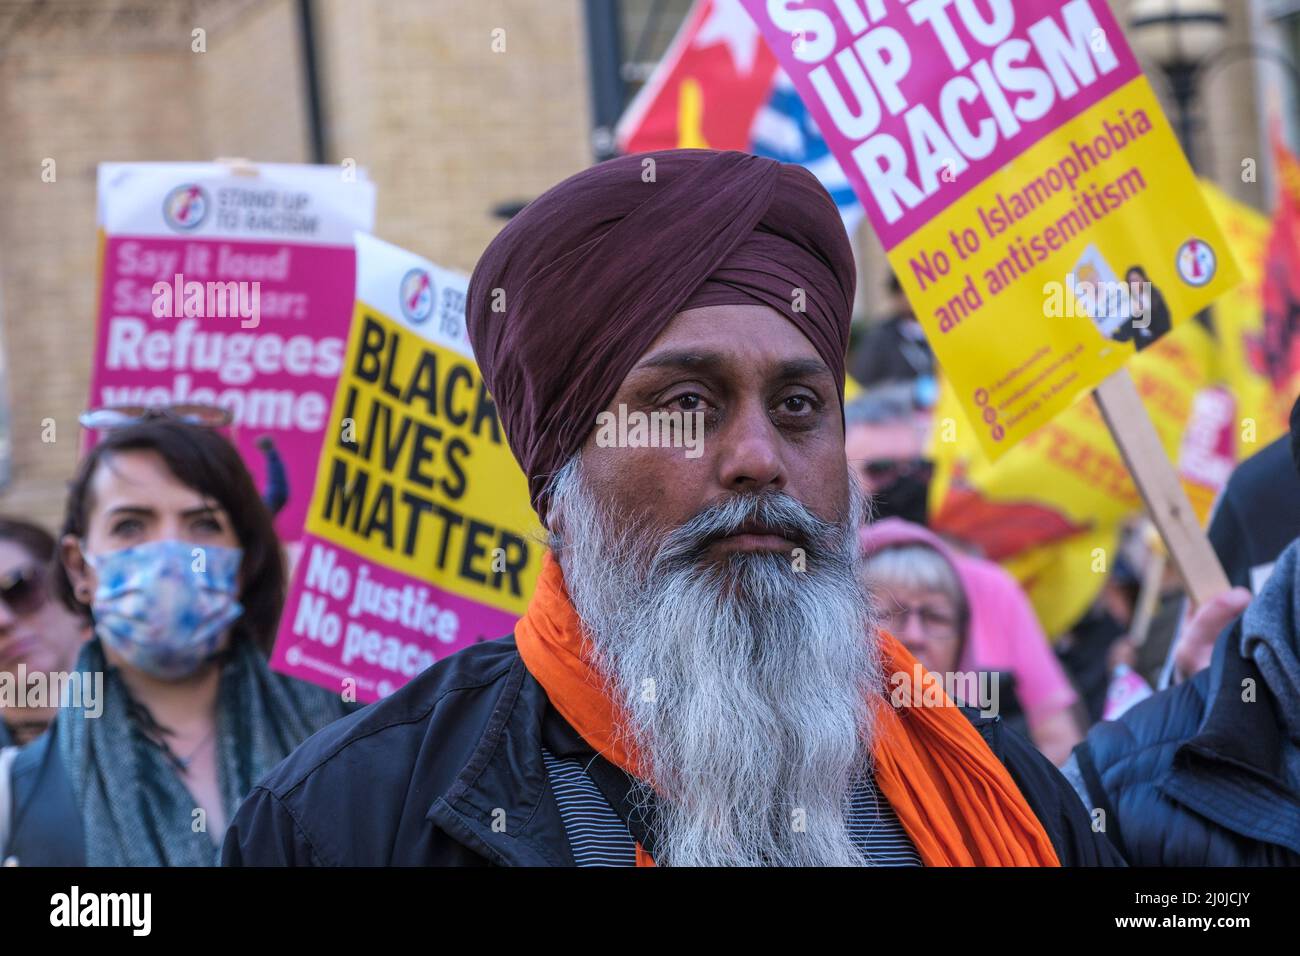 London, UK. 19th March 2022.One of a number of Sikhs on the march.  Several thousands from Stand Up To Racism, trade unionists, faith groups, politicians and other campaigns march from the BBC to a rally at Parliament Square under the slogan 'World Against Racism & Fascism', as part of a united day of action with Glasgow, Cardiff and cities around the world. The event opposed the Tory racist offensive of the Nationality and Borders Bill, Policing Bill and Higher Education Bill with these racist bills attacking refugees and migrants, Gypsy Roma and Traveller communities, and supported the #Blac Stock Photo